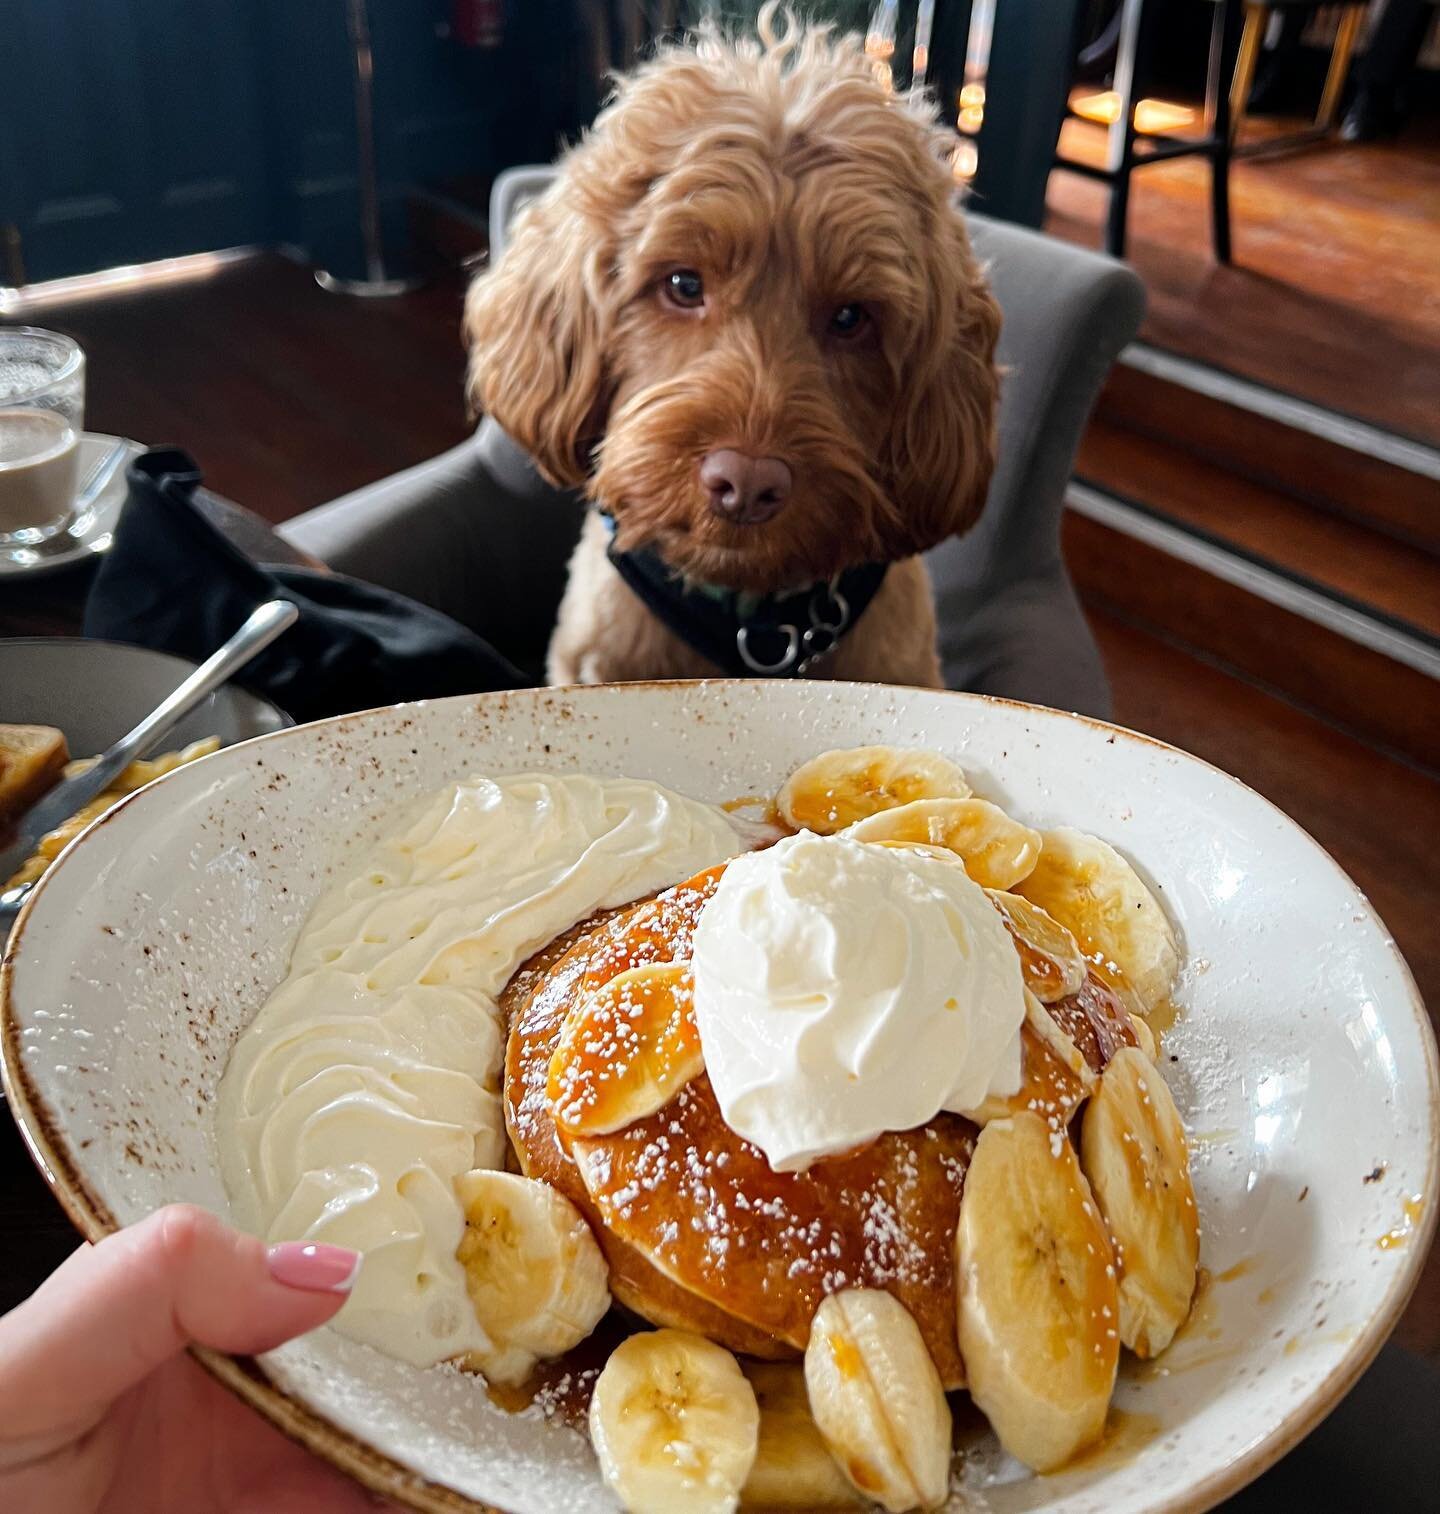 Life is better with pancakes 🥞 

Ft. Our lovely Otis😍